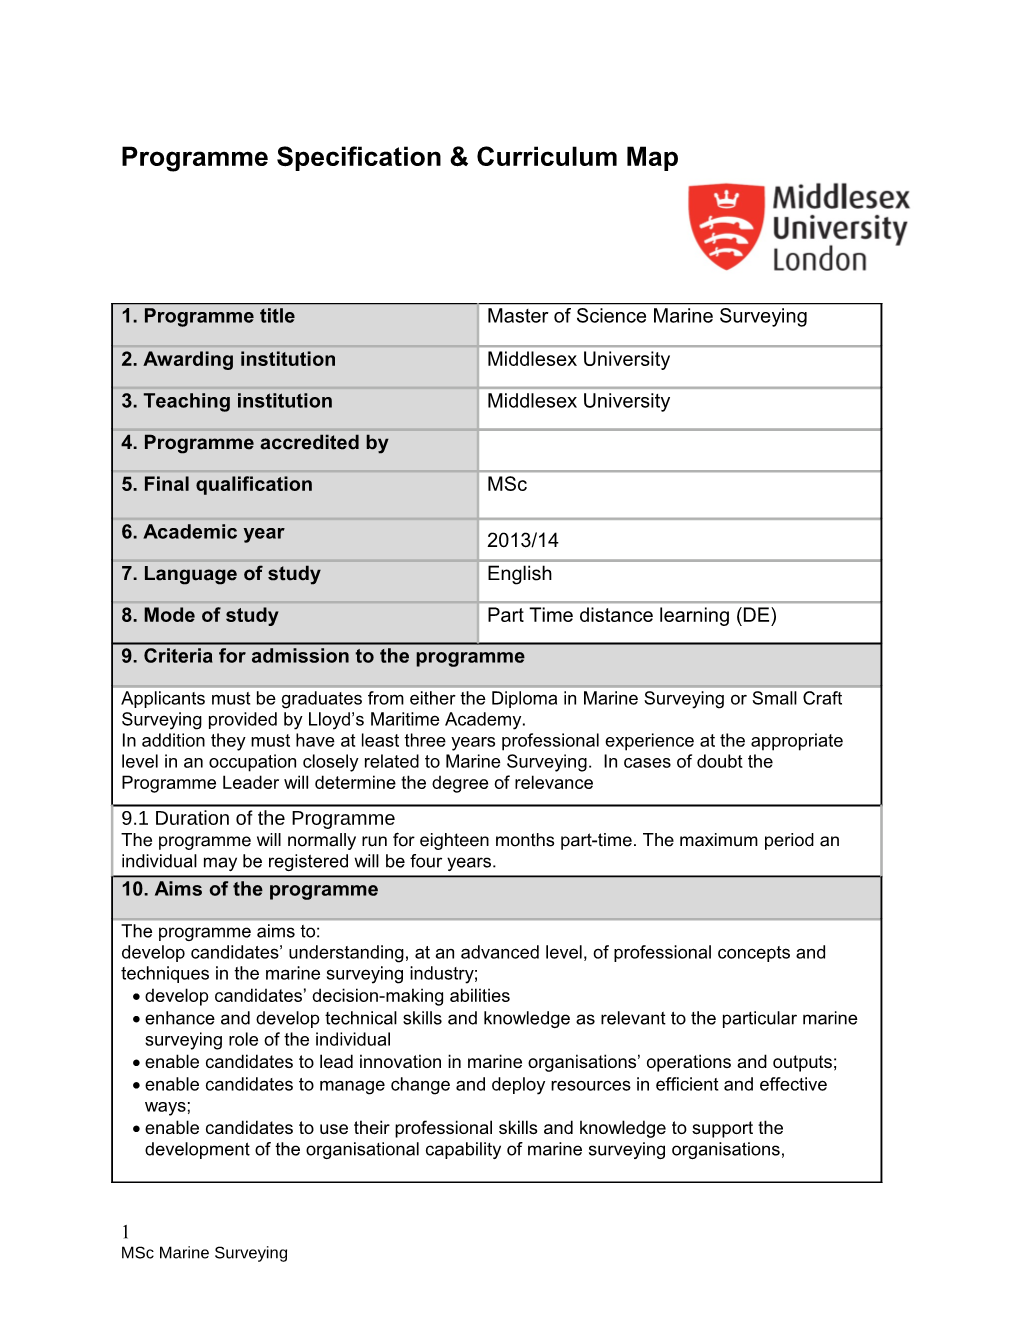 Programme Specification & Curriculum Map